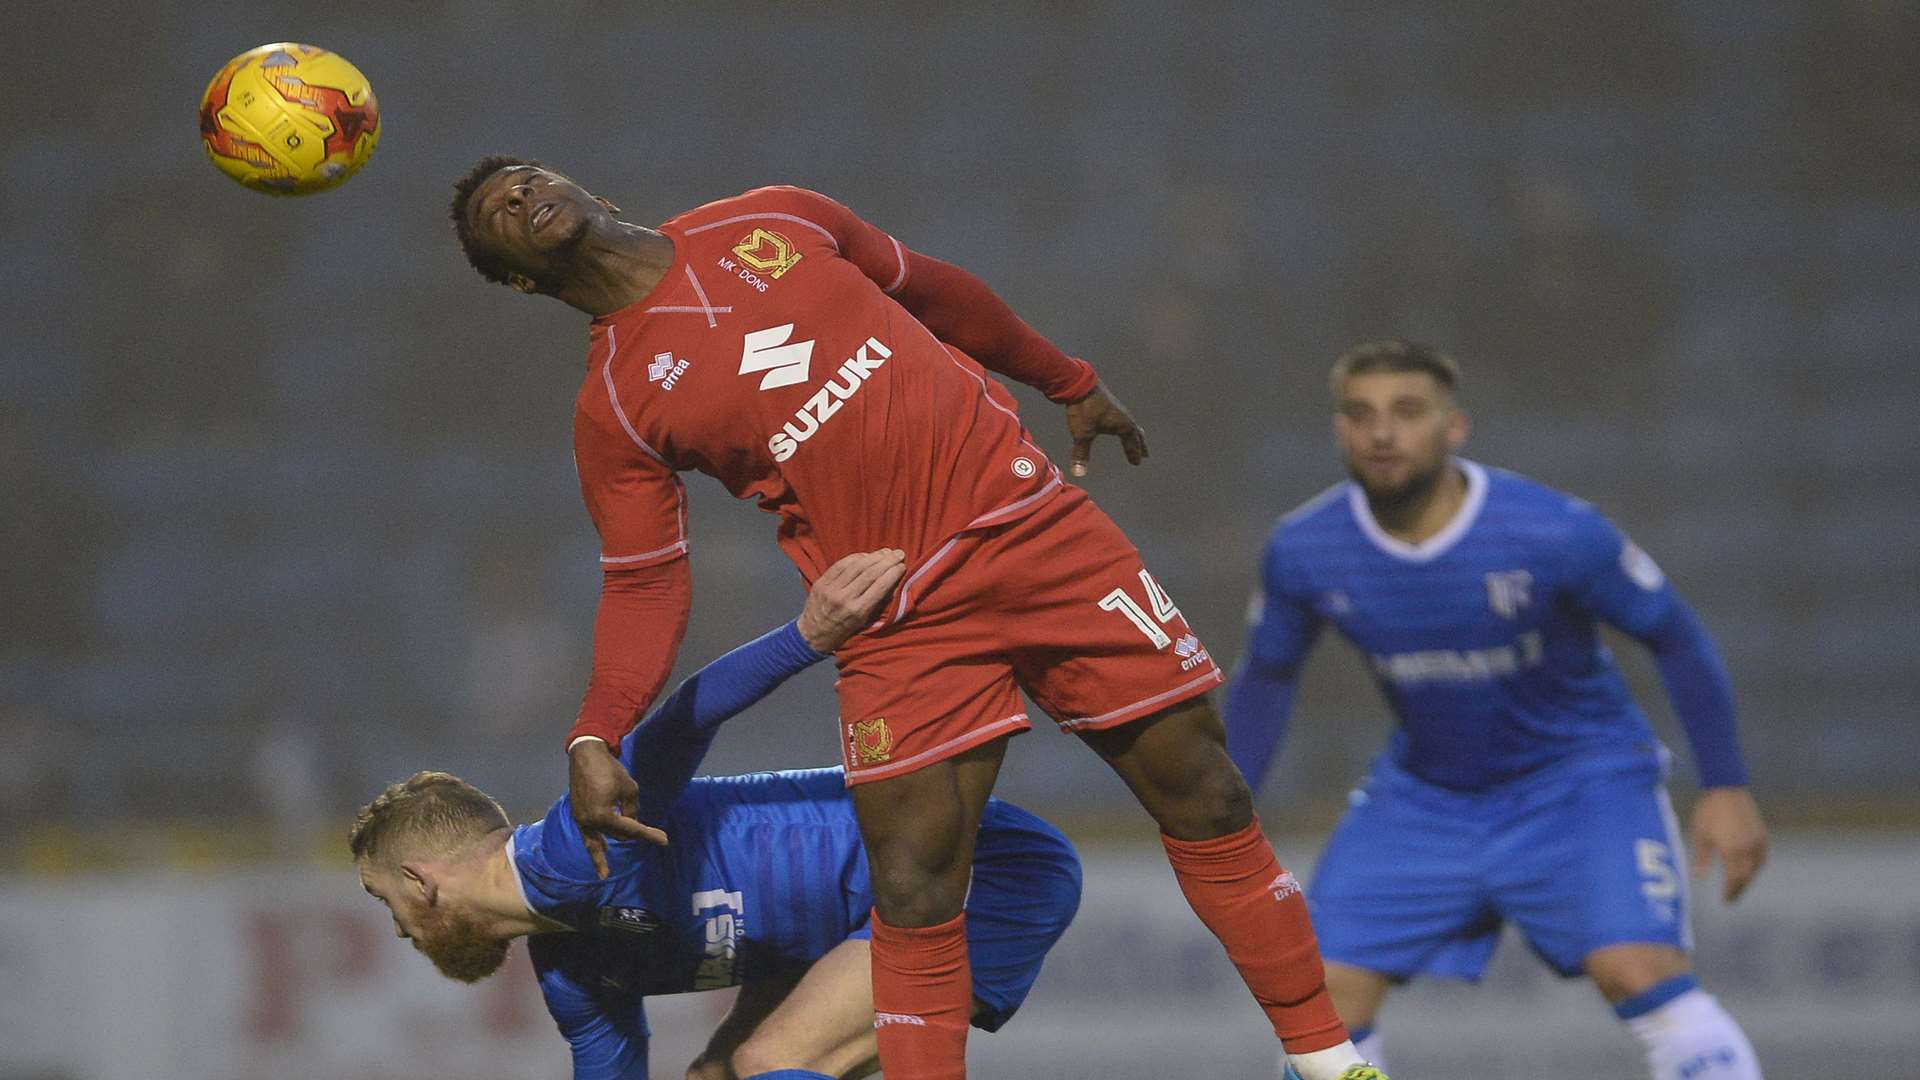 Gills beaten in the air by Kieran Agard Picture: Ady Kerry